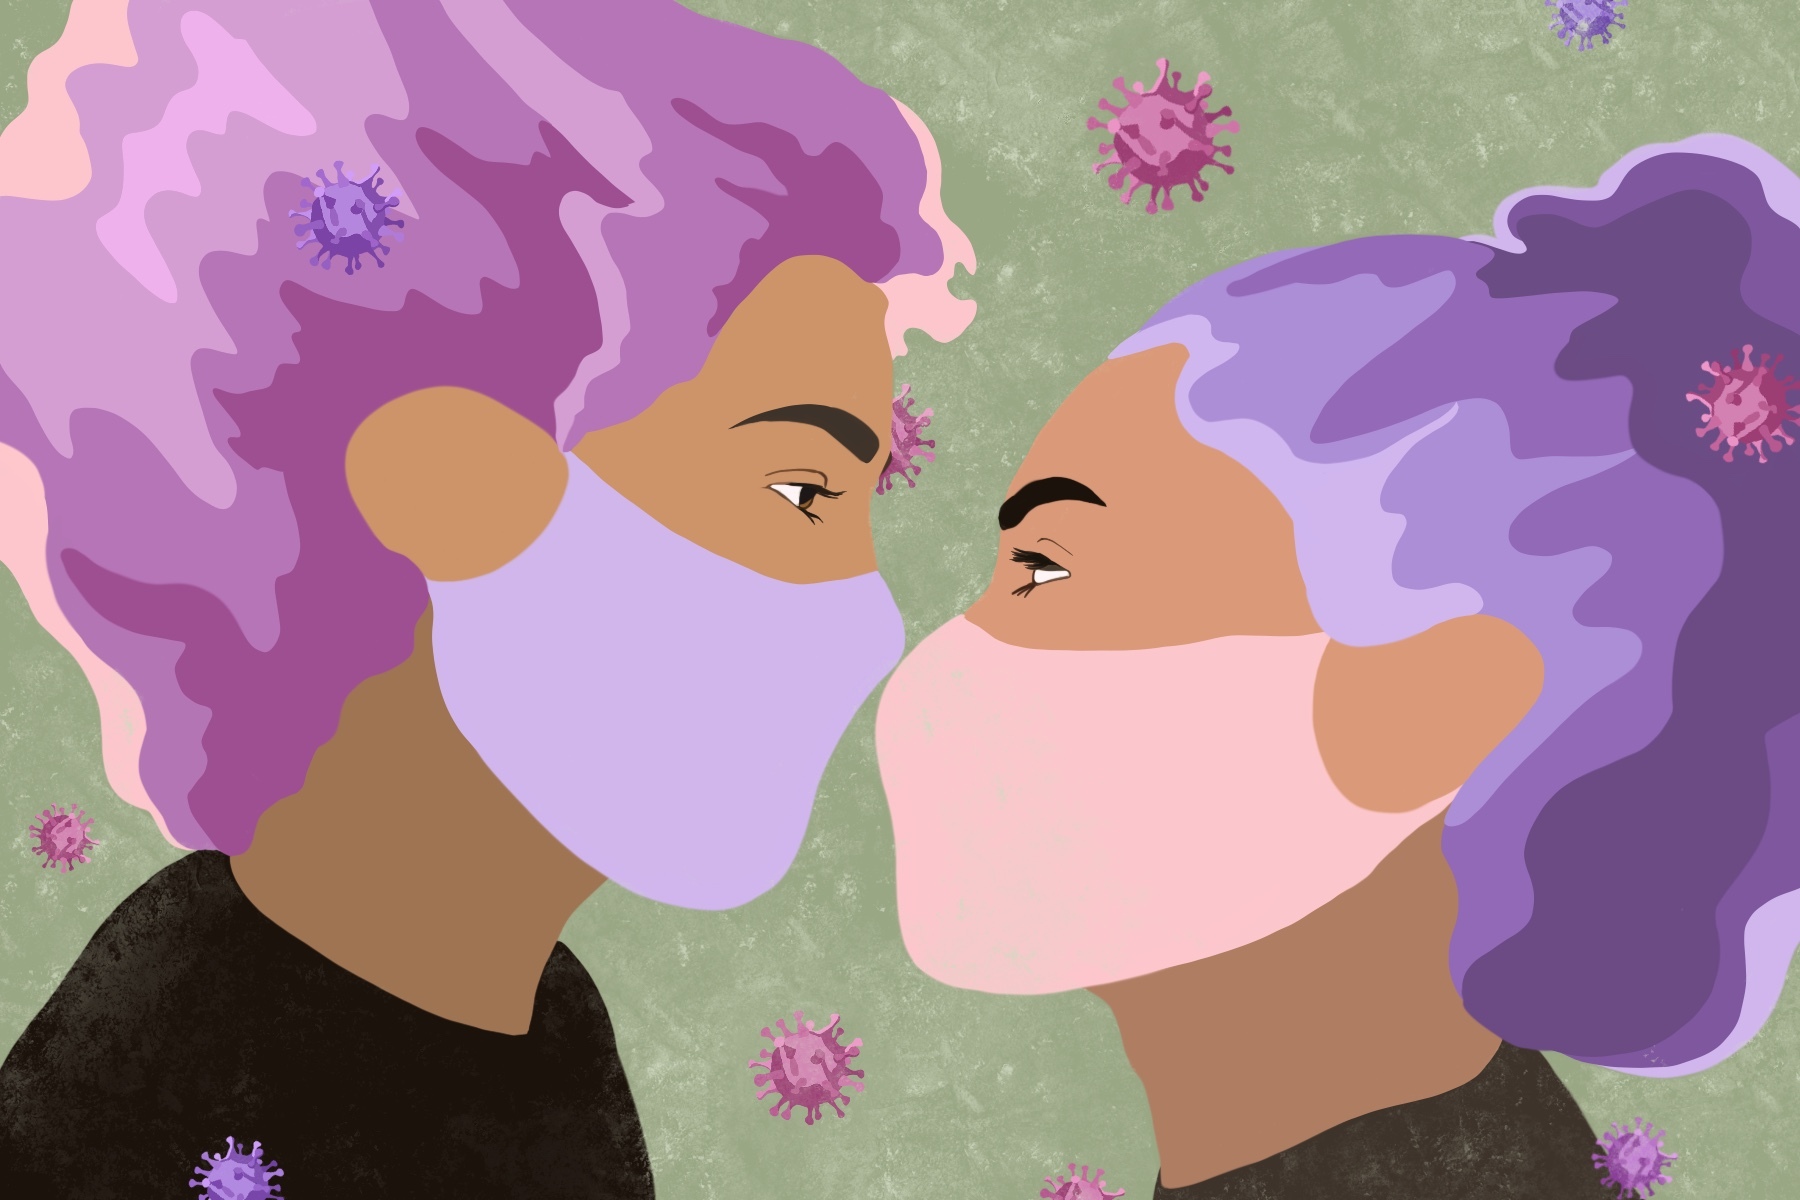 An illustration of a couple wearing masks symbolizing the hookup culture present at colleges